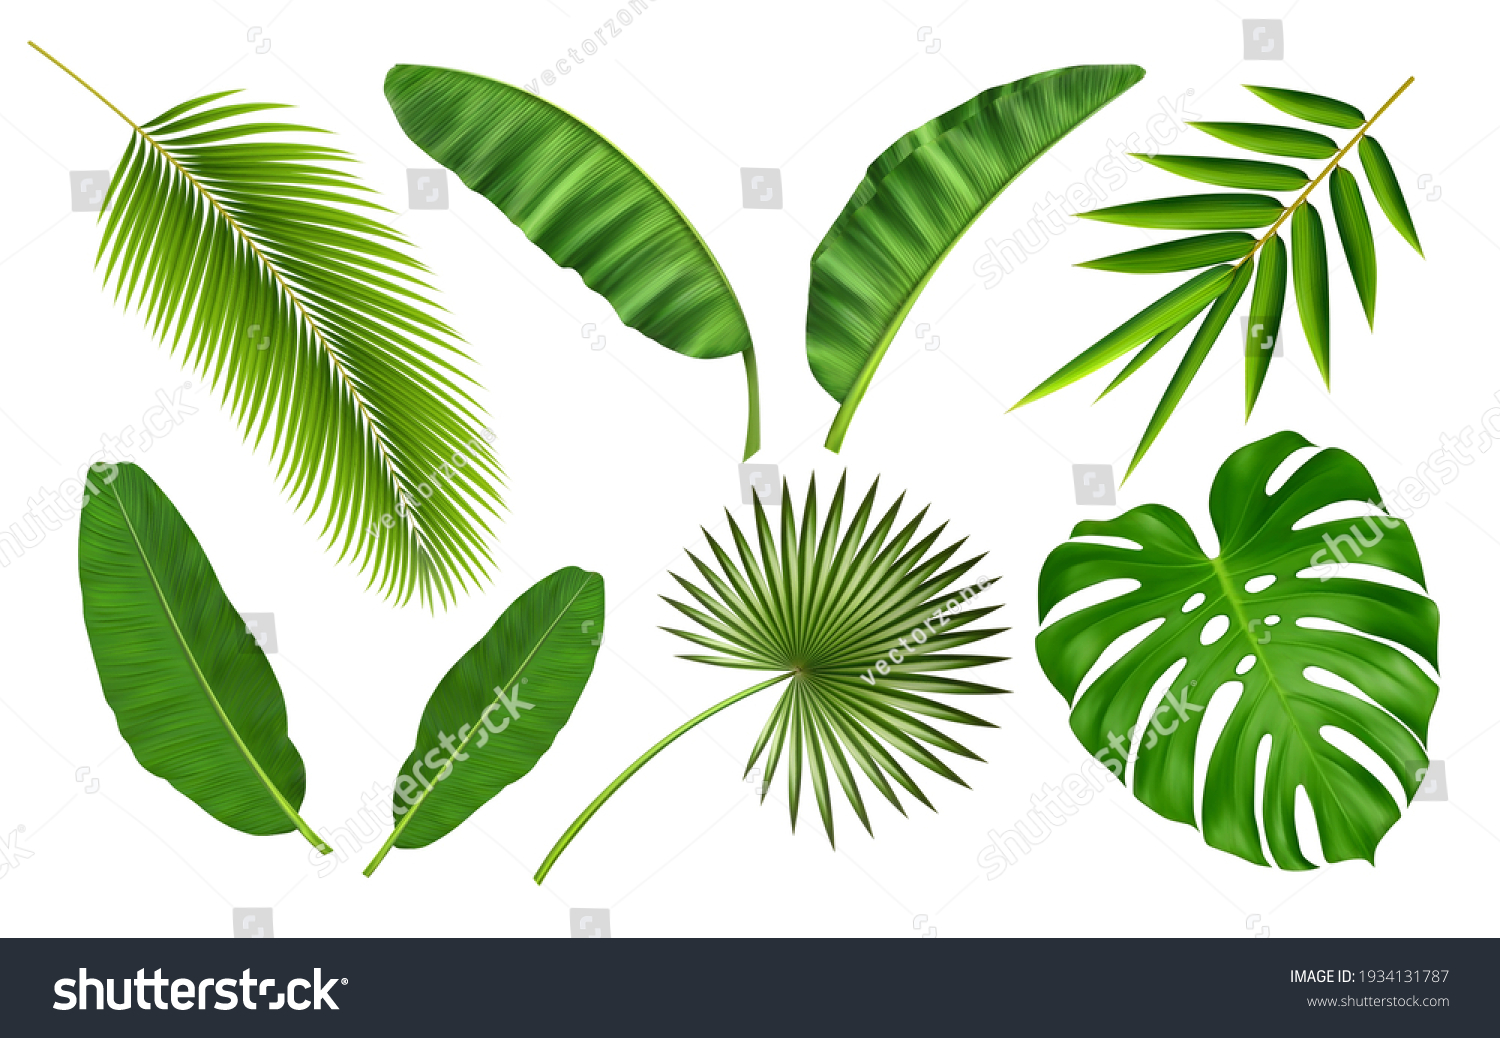 SVG of Tropical different type exotic leaves set. Jungle plants. Calathea, Monstera and palm leaves. Realistic vector  illustration isolated on white background svg